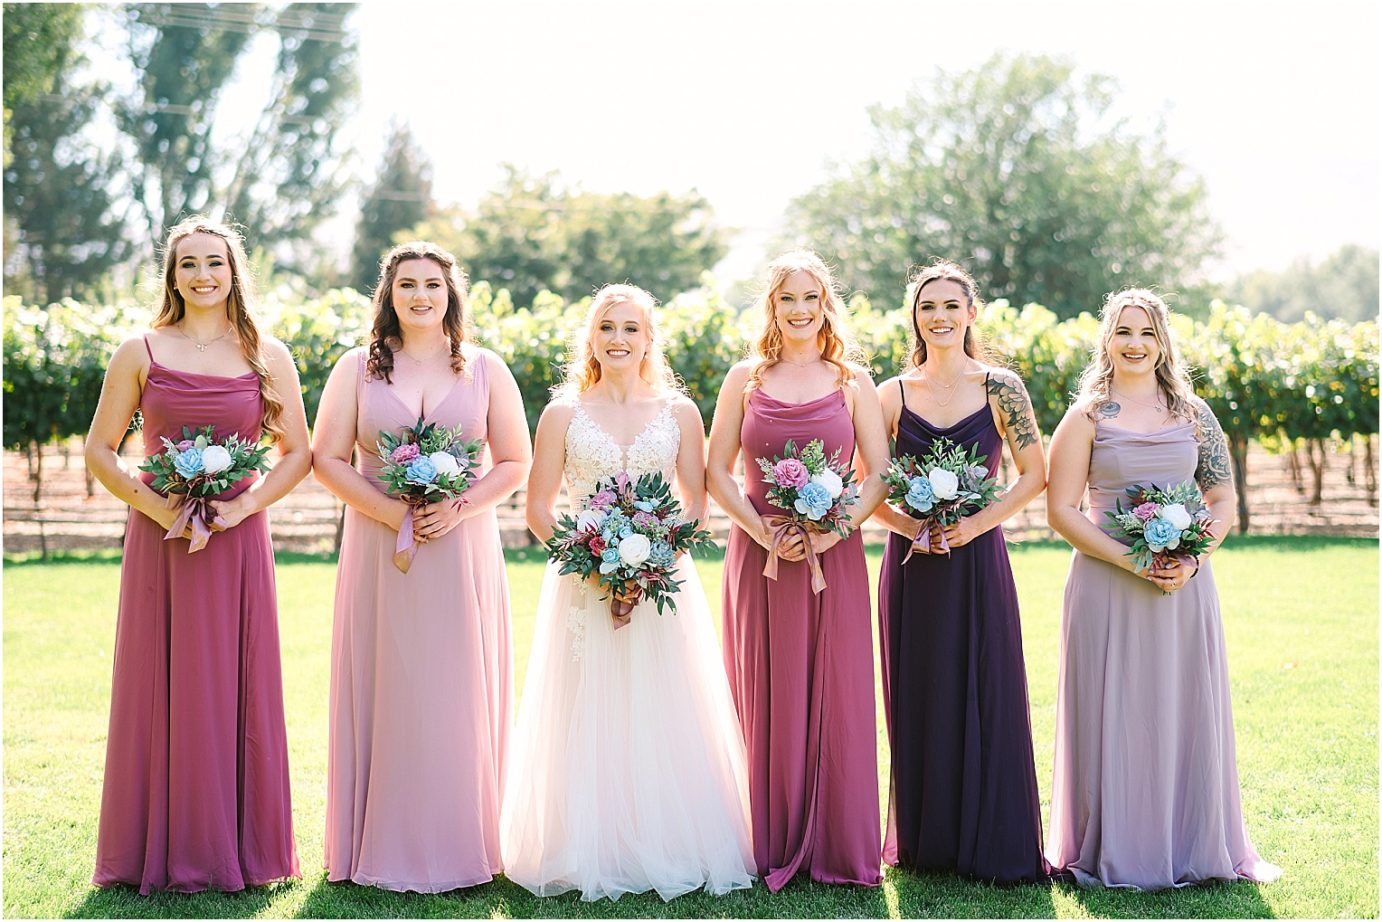 Wedding at Sugar Pine Barn - bride and bridesmaids wearing different colors of purple